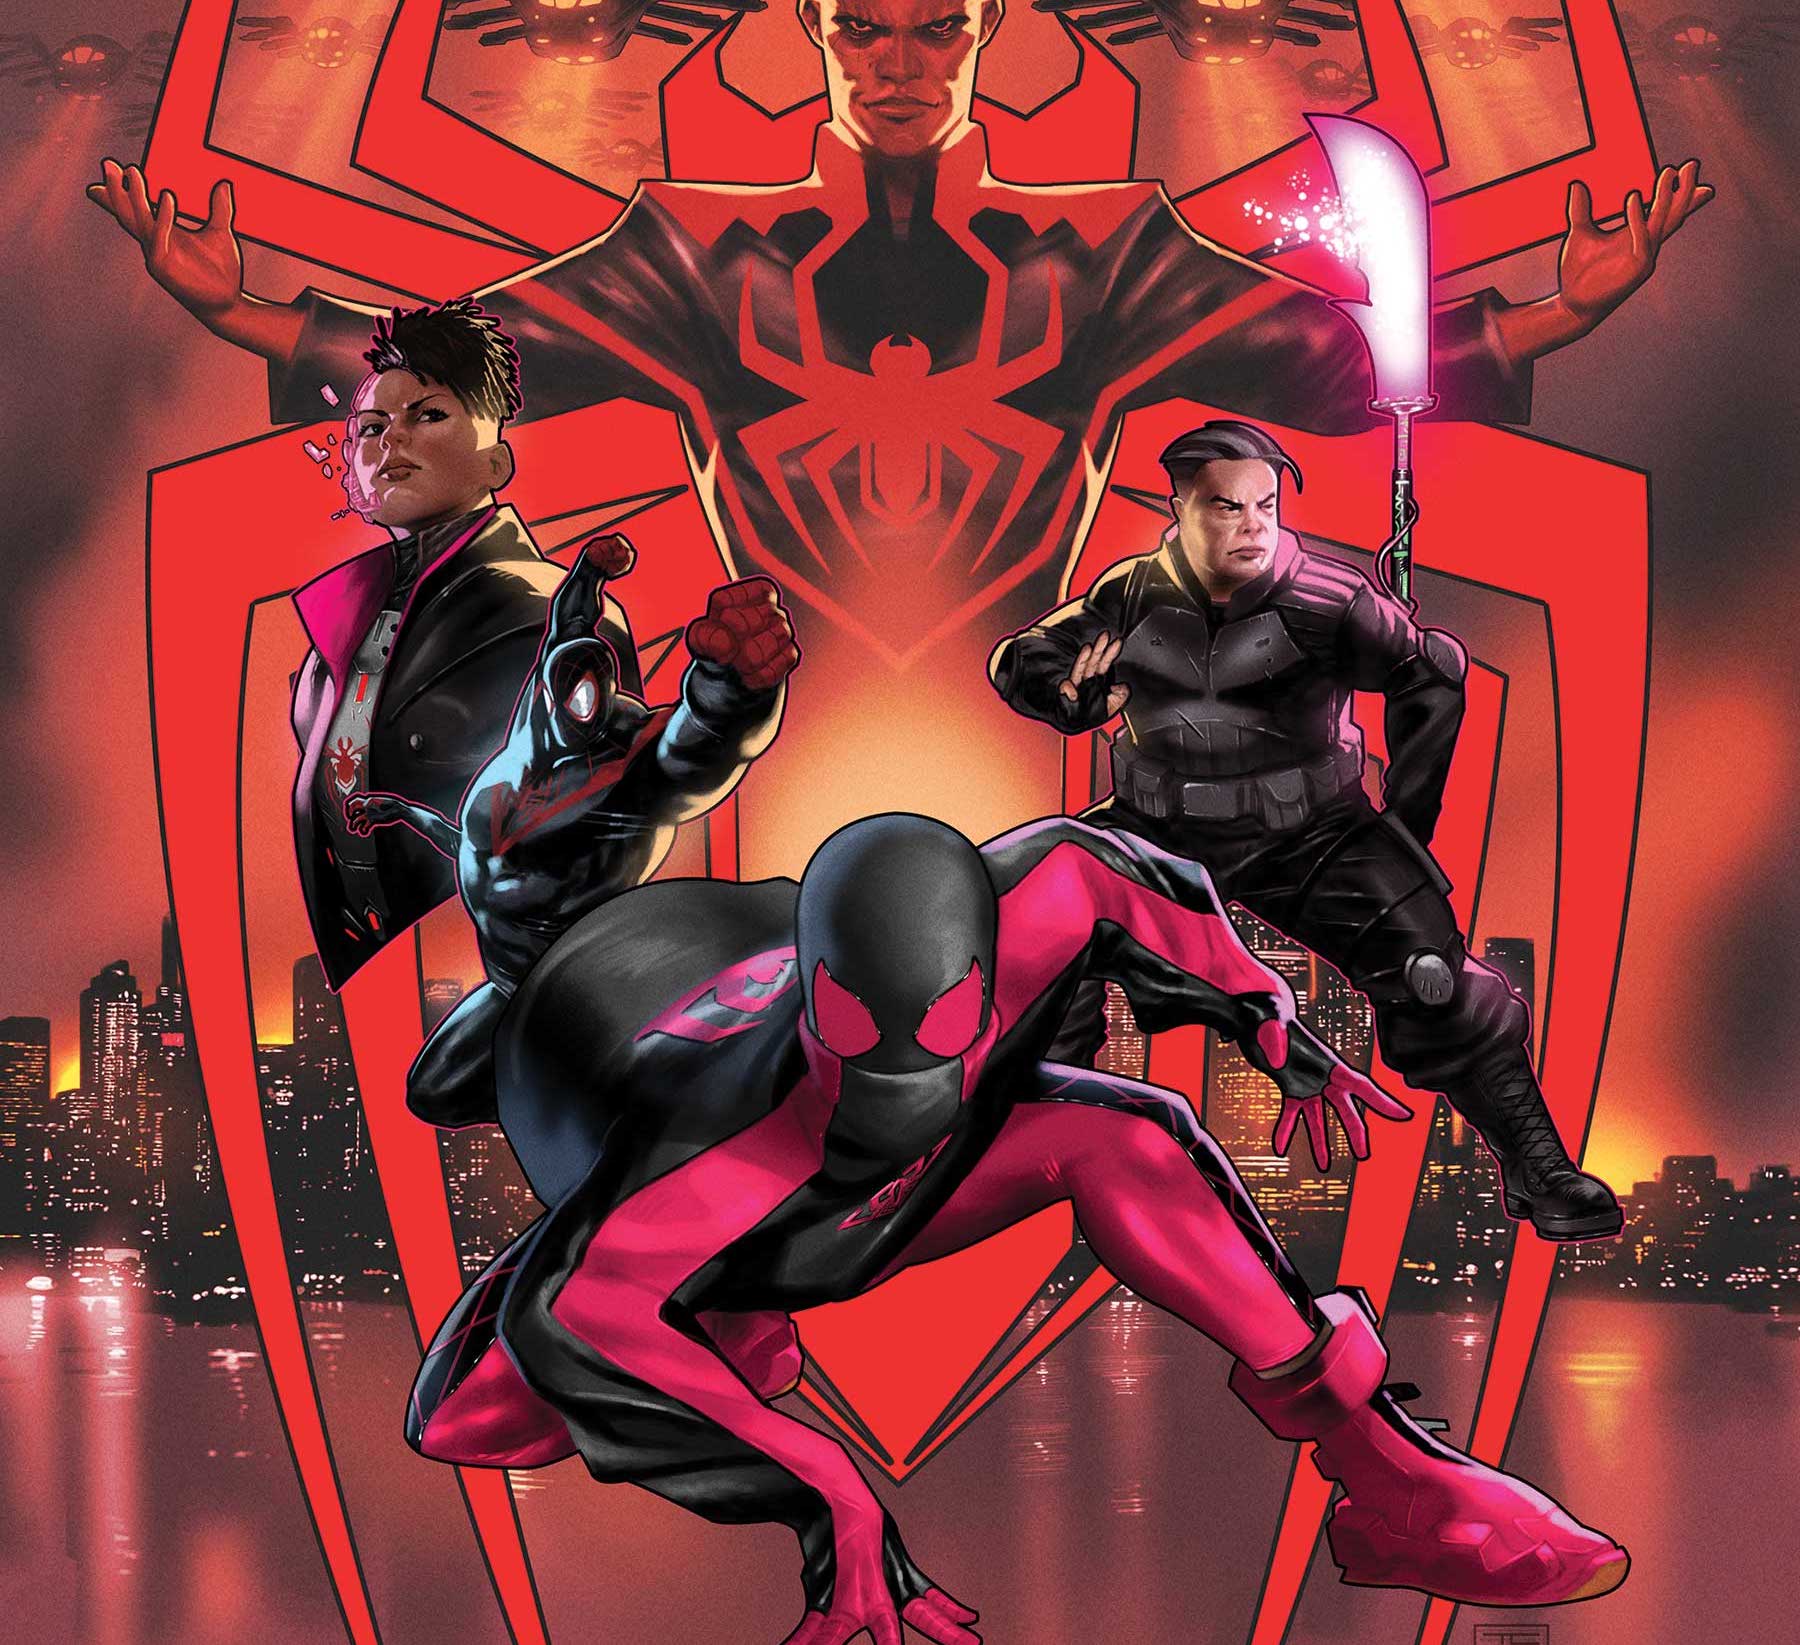 'Miles Morales: Spider-Man' #38 peers into a possible dark future for Miles